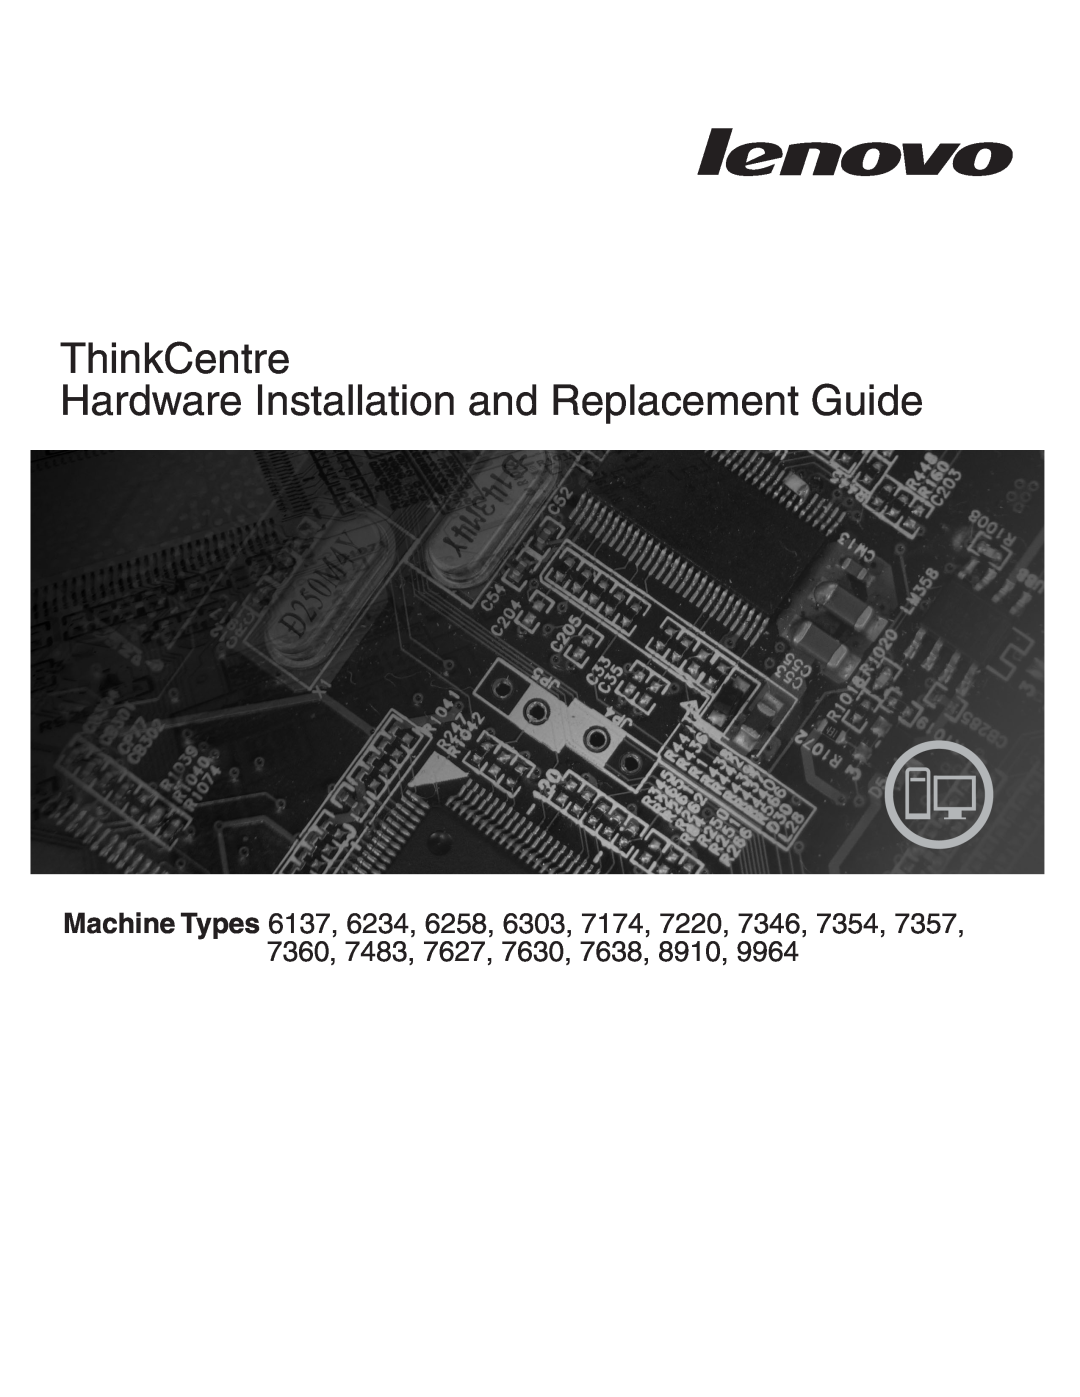 Lenovo 6137, 9964, 8910, 7627, 7630, 7360, 7483, 7357, 7354, 7220 manual ThinkCentre, Hardware Installation and Replacement Guide 